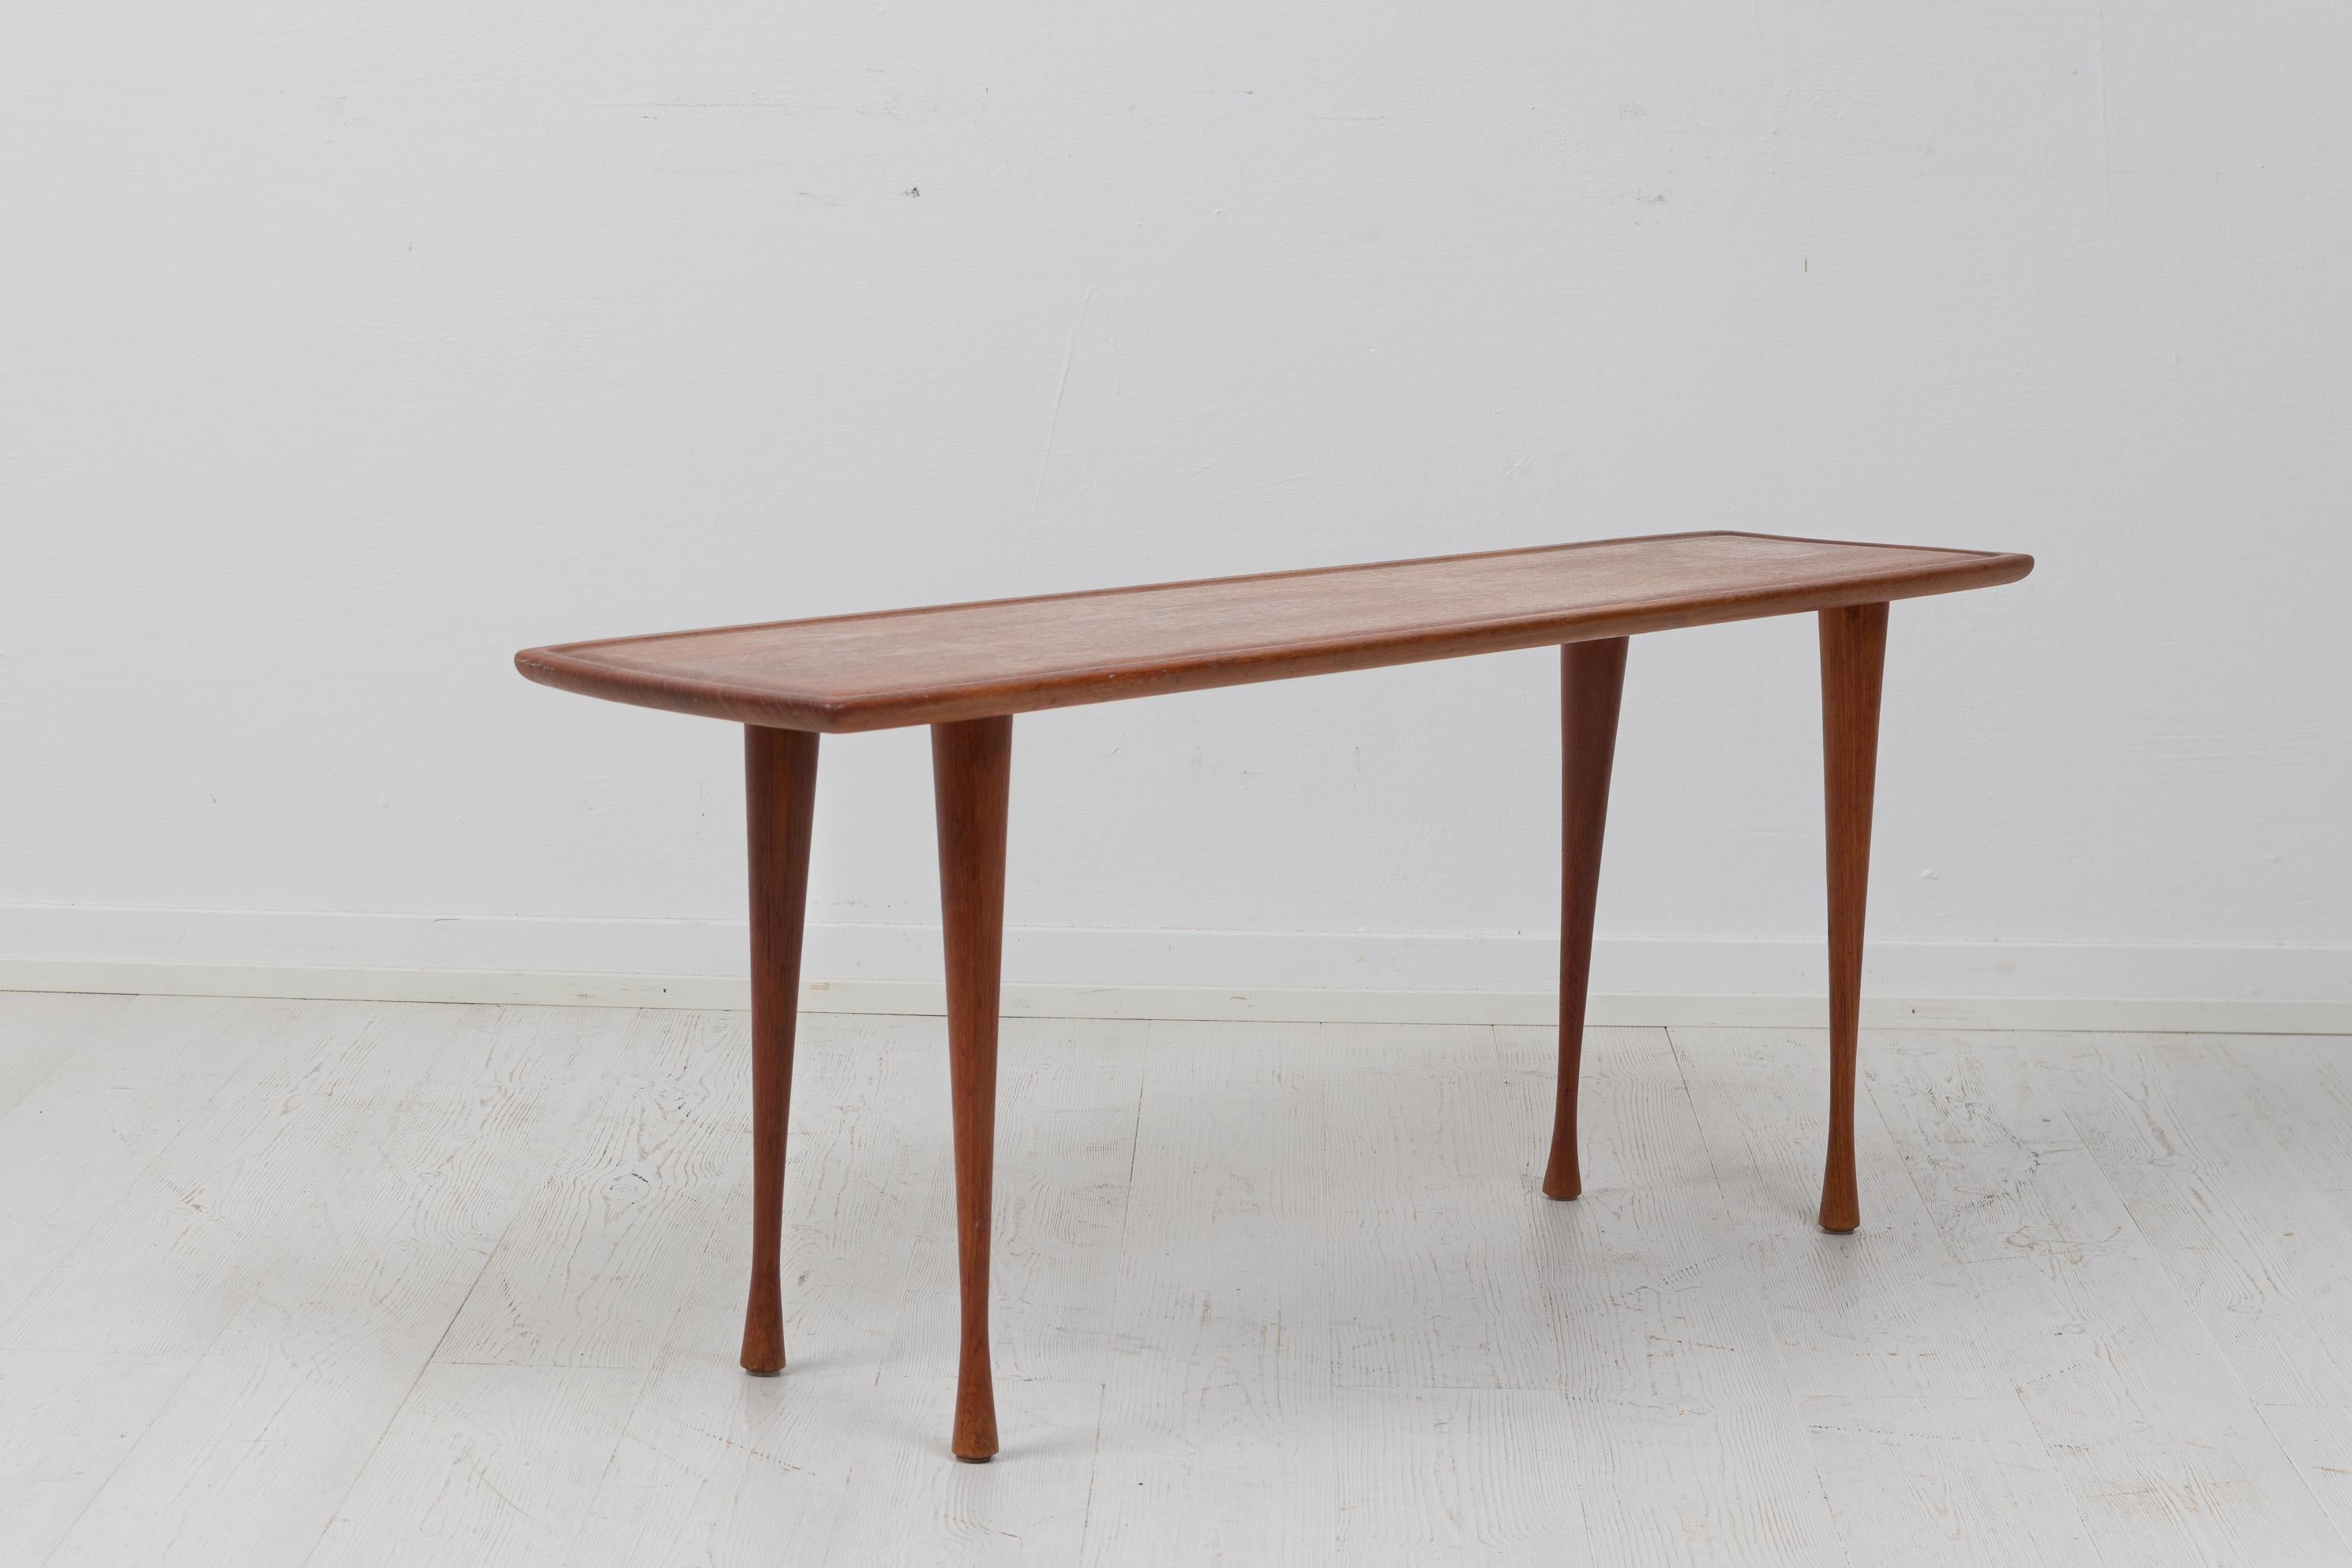 Scandinavian modern teak table from the mid 20th century, around 1960. The table is danish and has a thin and narrow shape. The legs are an elegant touch, they have a slightly irregular shape where they thin out and then curve back again. The table